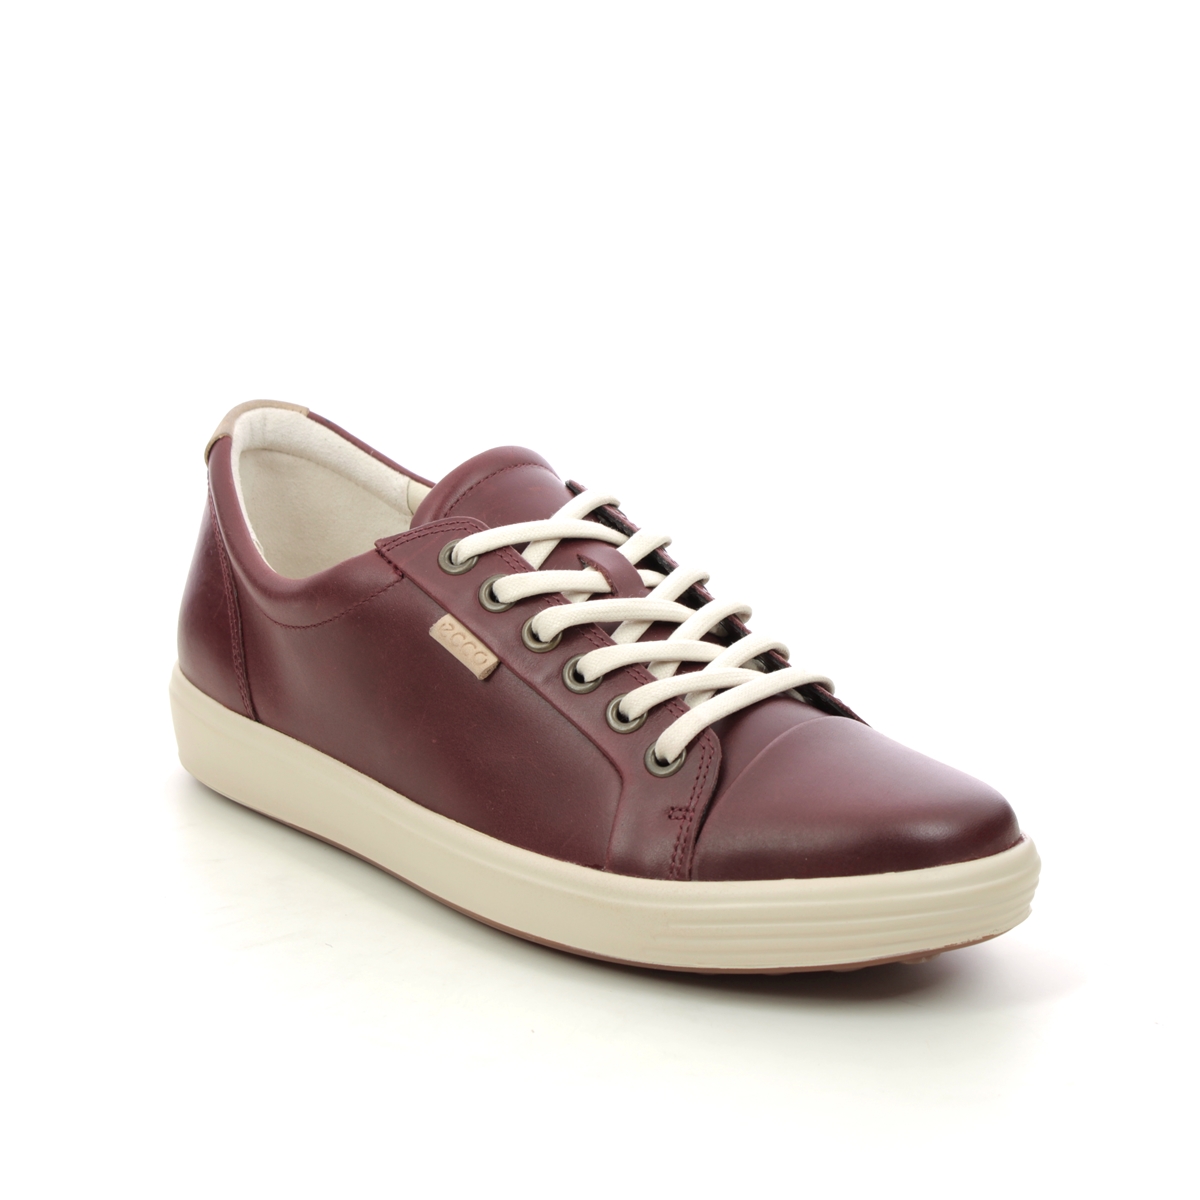 Ecco Soft 7 Lace Plum Womens Trainers 430003-01588 In Size 42 In Plain Plum